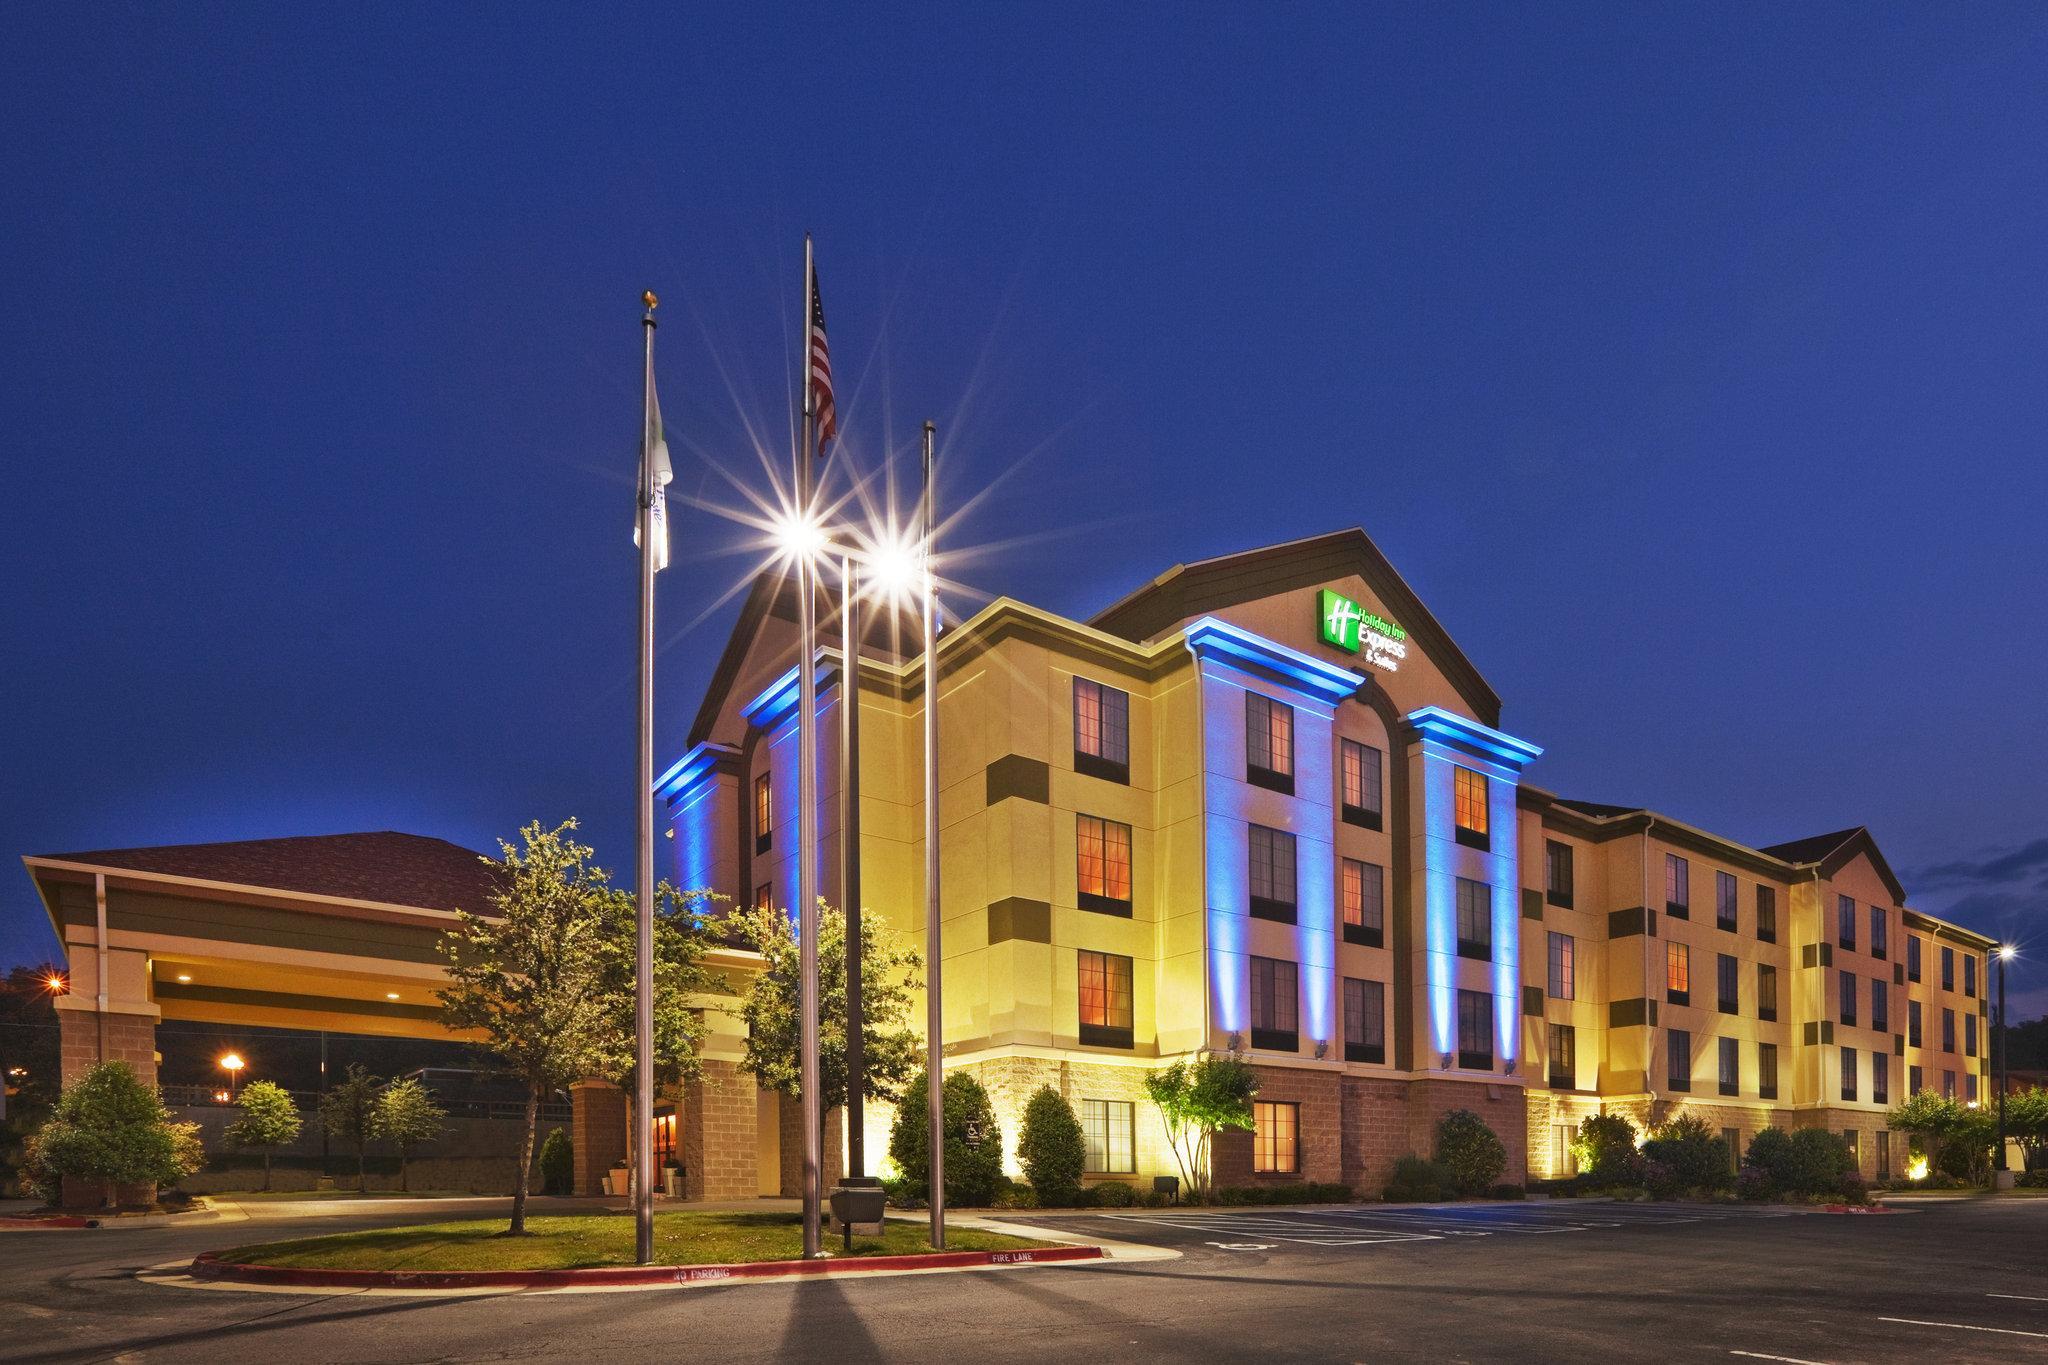 Photo of Holiday Inn Express & Suites McAlester, McAlester, OK